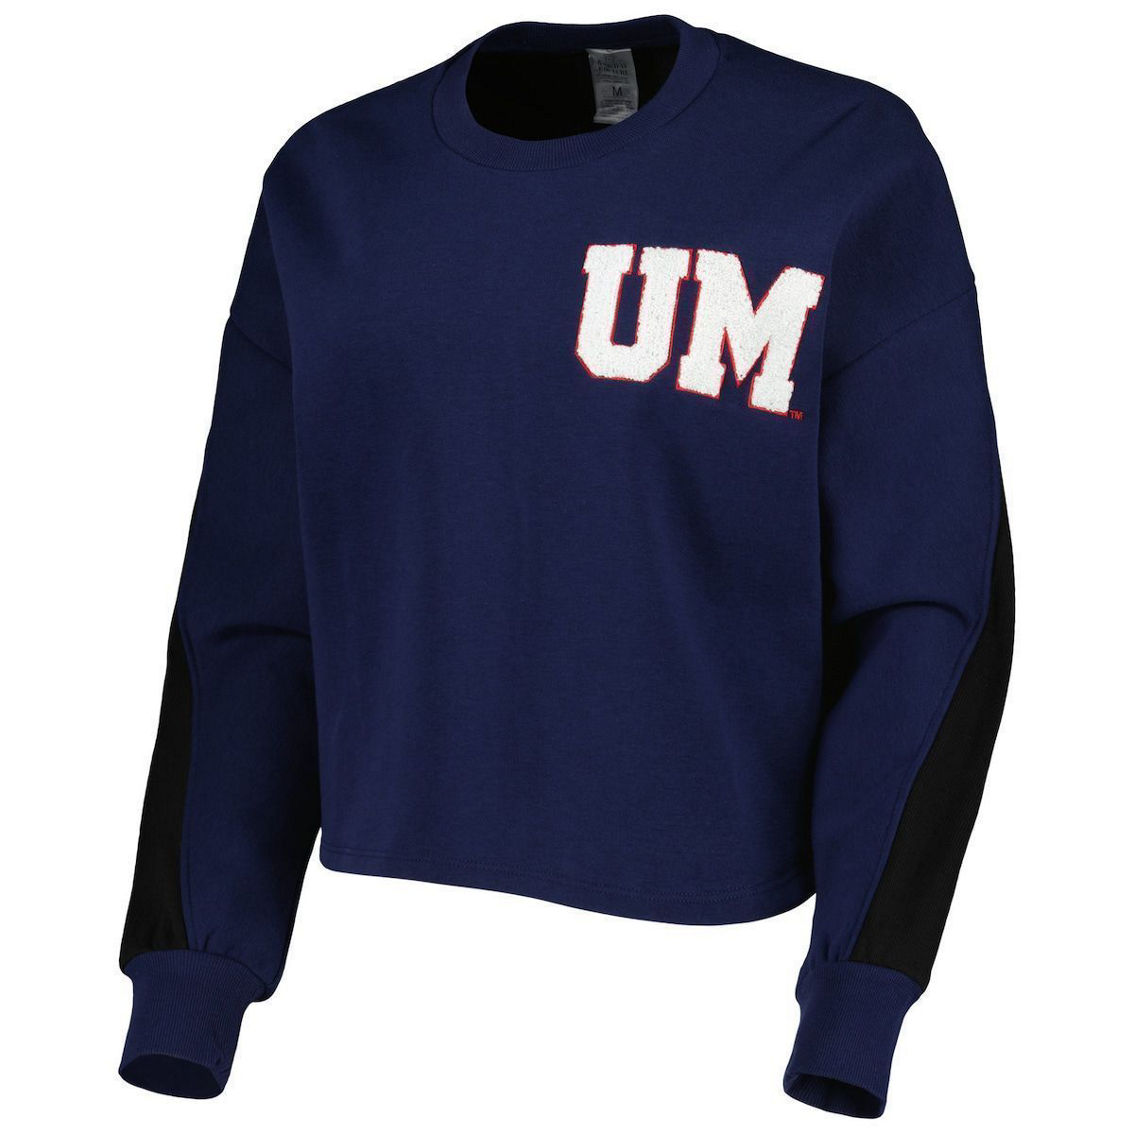 Gameday Couture Women's Navy Michigan Wolverines Back To Reality Colorblock Pullover Sweatshirt - Image 3 of 4